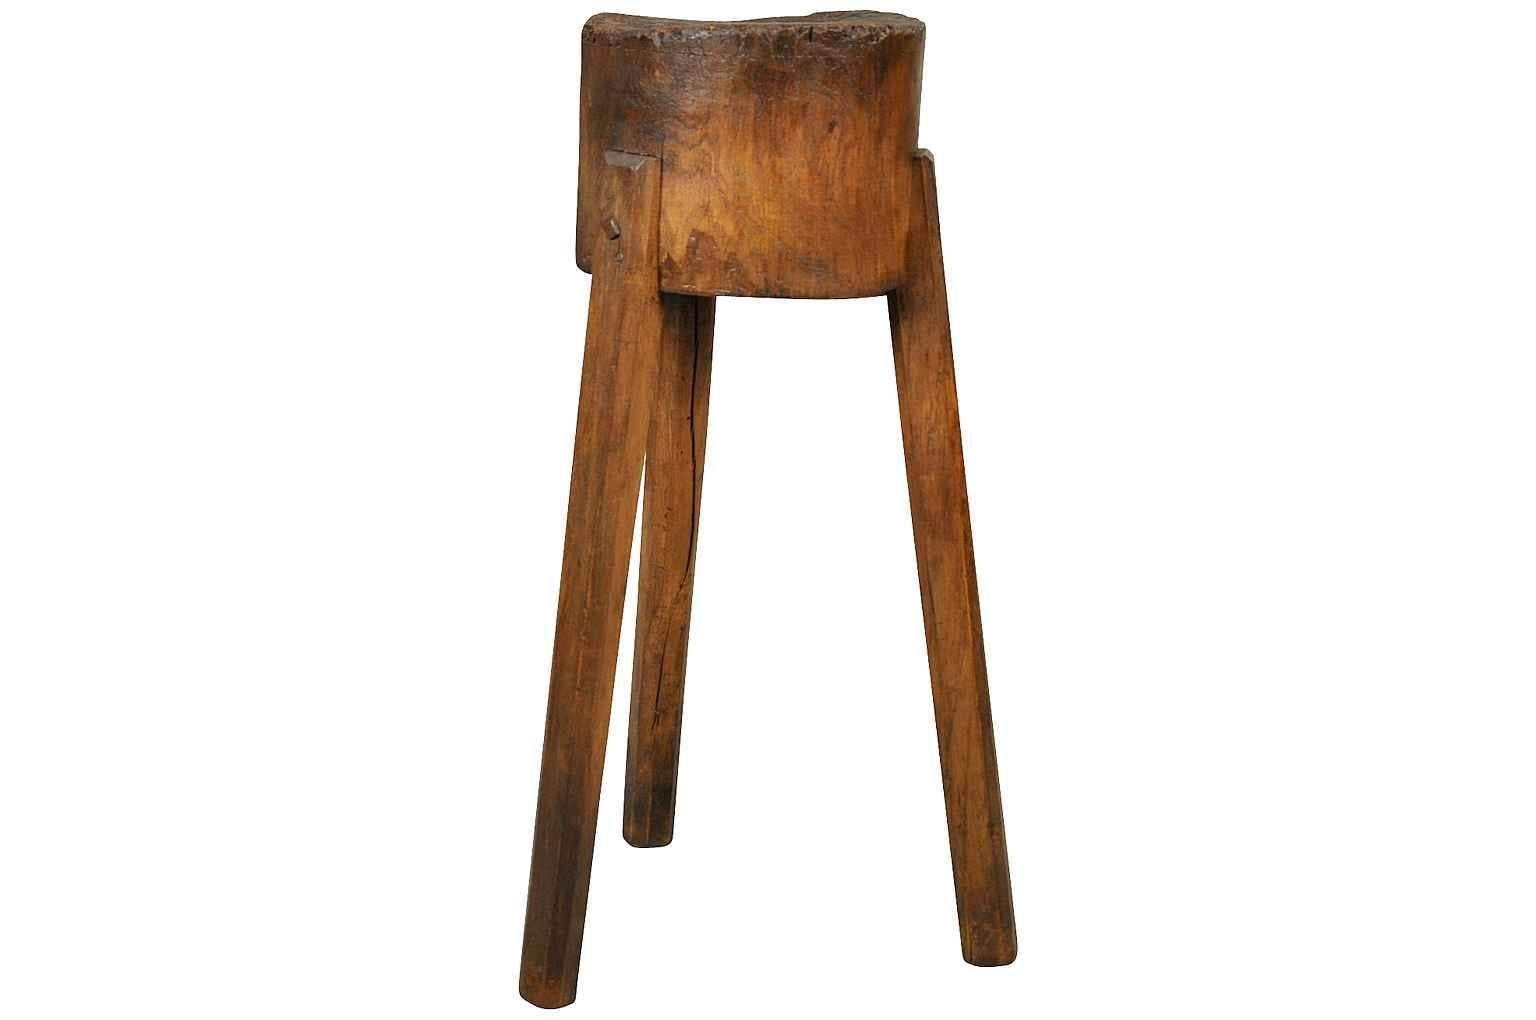 A charming 19th century billot or butcher block from the Catalan region of Spain. They serve wonderfully as cocktail tables and small pedestals.